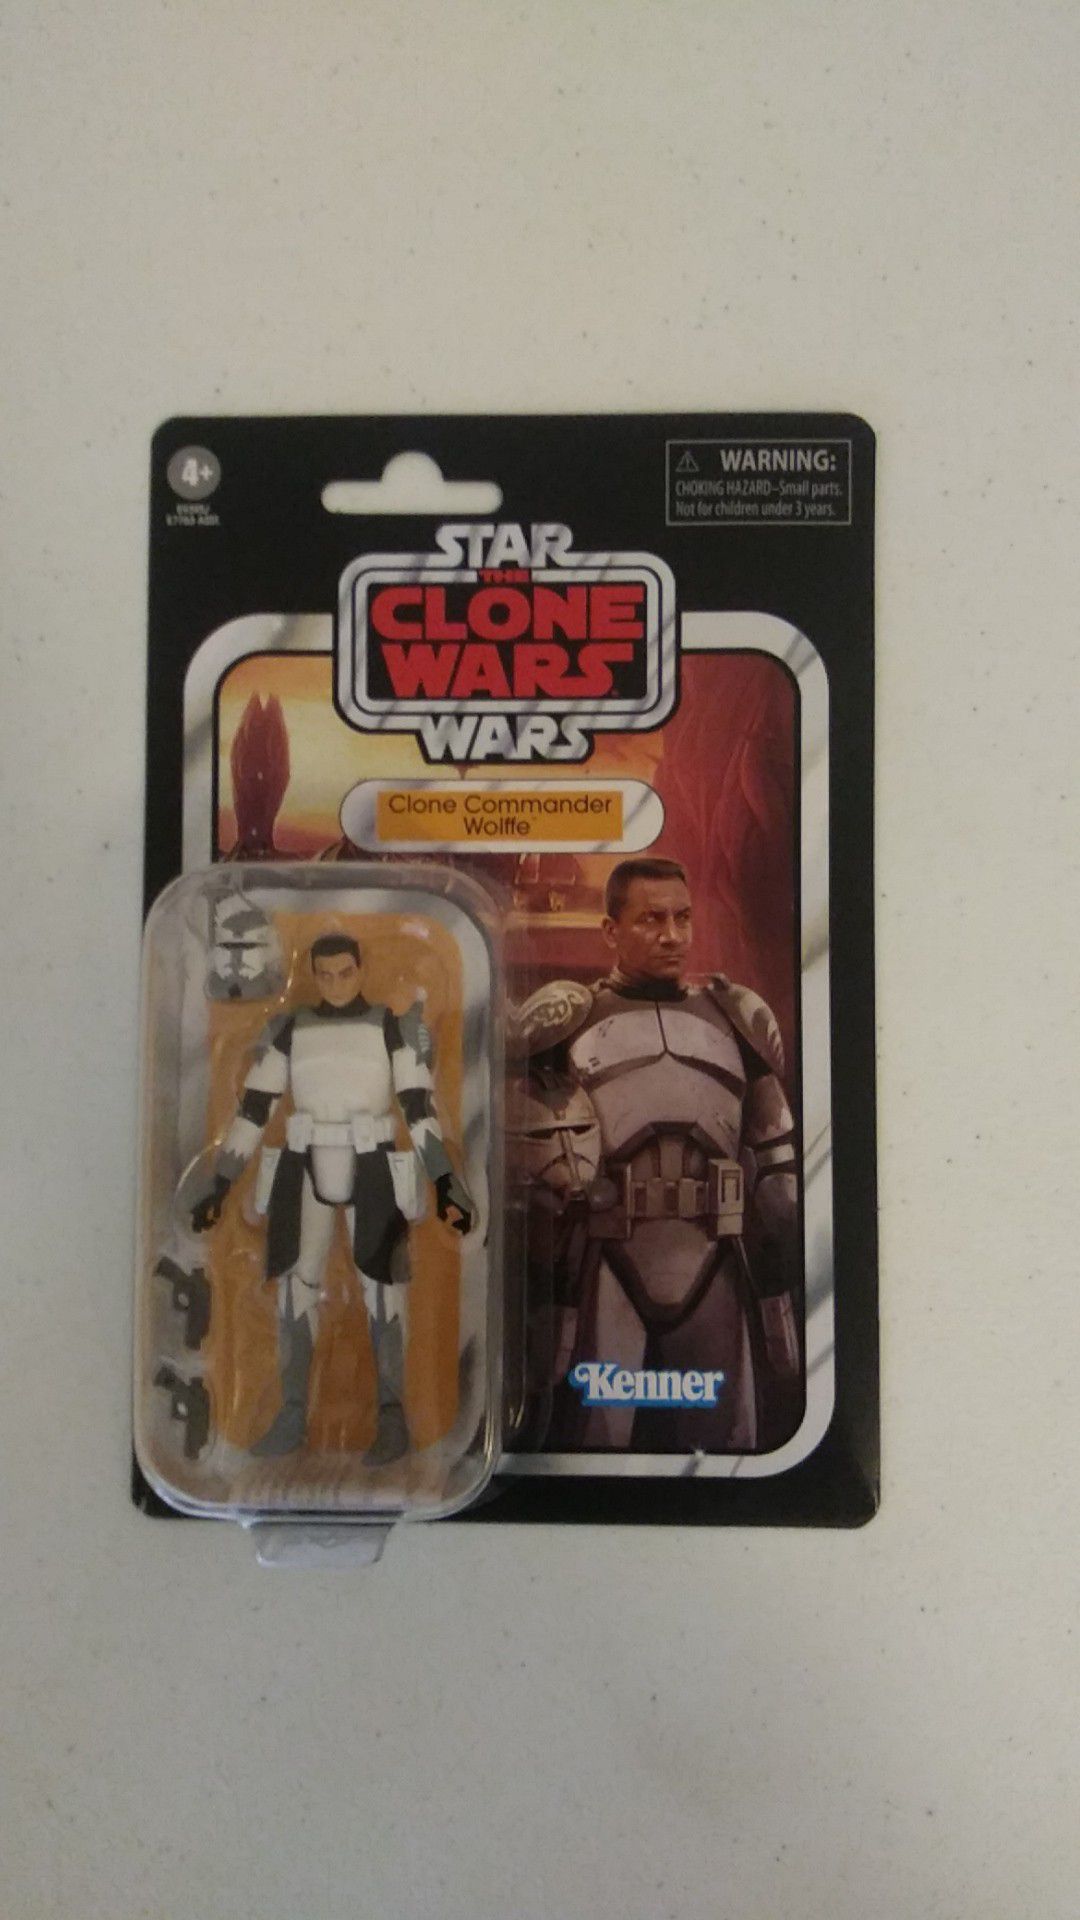 Star Wars the clone wars the vintage collection clone commander wolffe action figure kenner